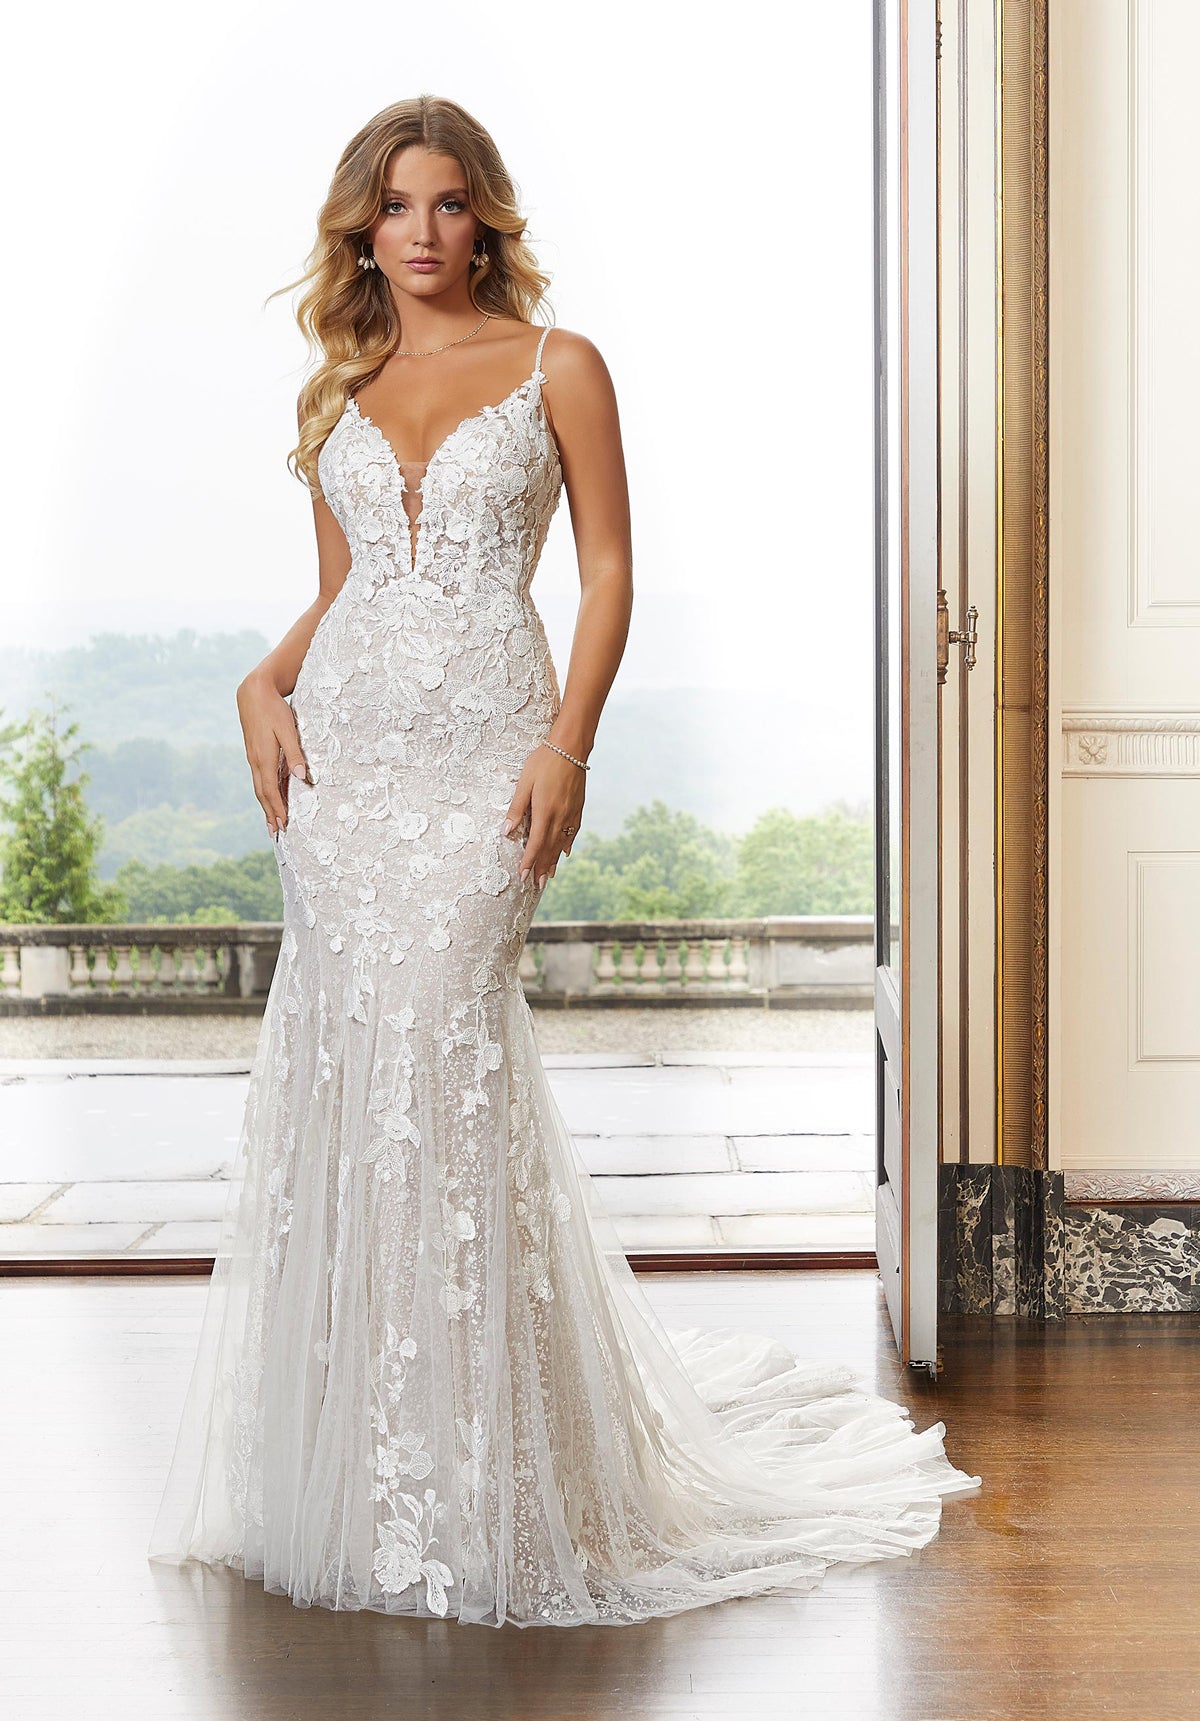 Morilee - 2403 - Desiree - Cheron's Bridal, Wedding Gown - Morilee Line - - Wedding Gowns Dresses Chattanooga Hixson Shops Boutiques Tennessee TN Georgia GA MSRP Lowest Prices Sale Discount